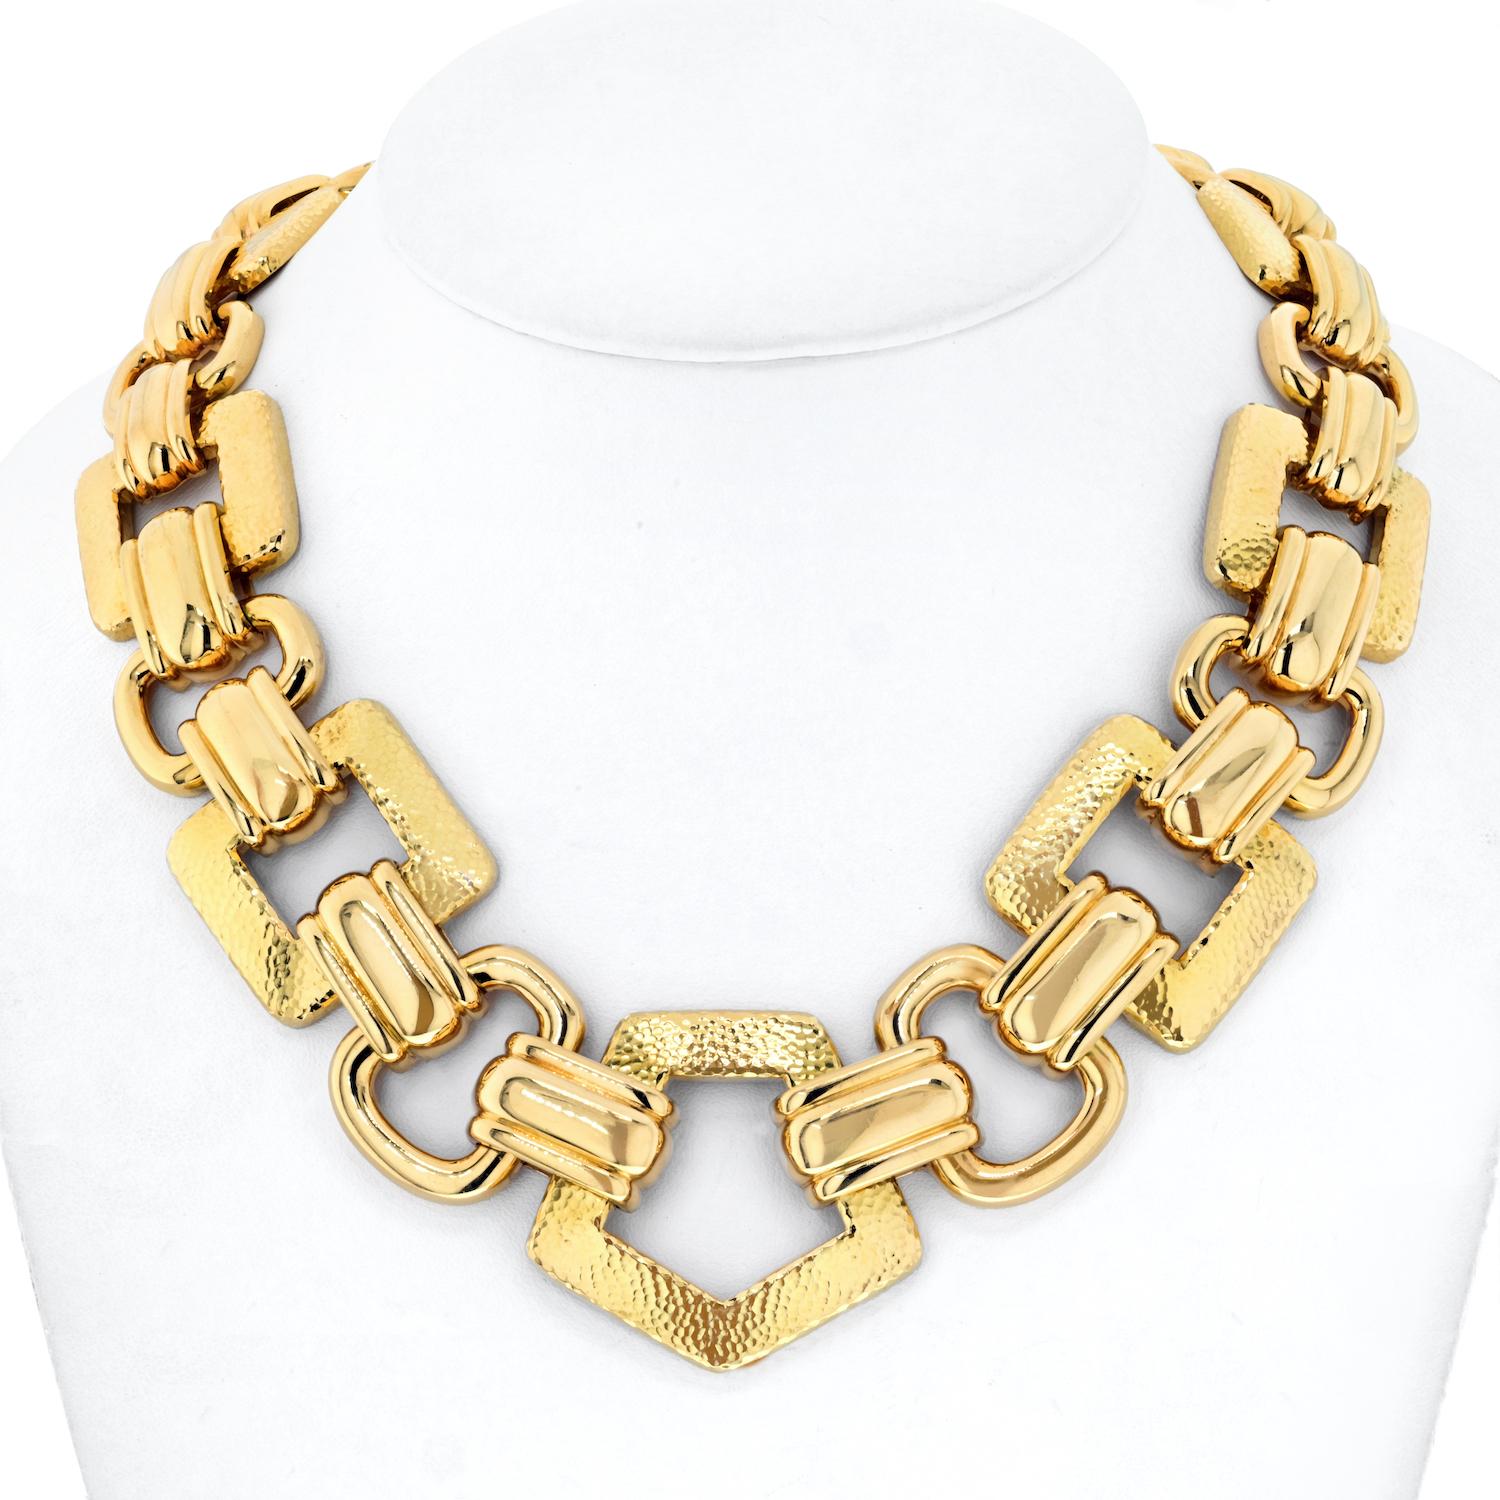 Step into the world of opulence with the David Webb Hammered and High Polished Gold Link Necklace, a true testament to the designer's mastery of craftsmanship and timeless elegance. This 18K gold necklace is a wearable work of art, seamlessly